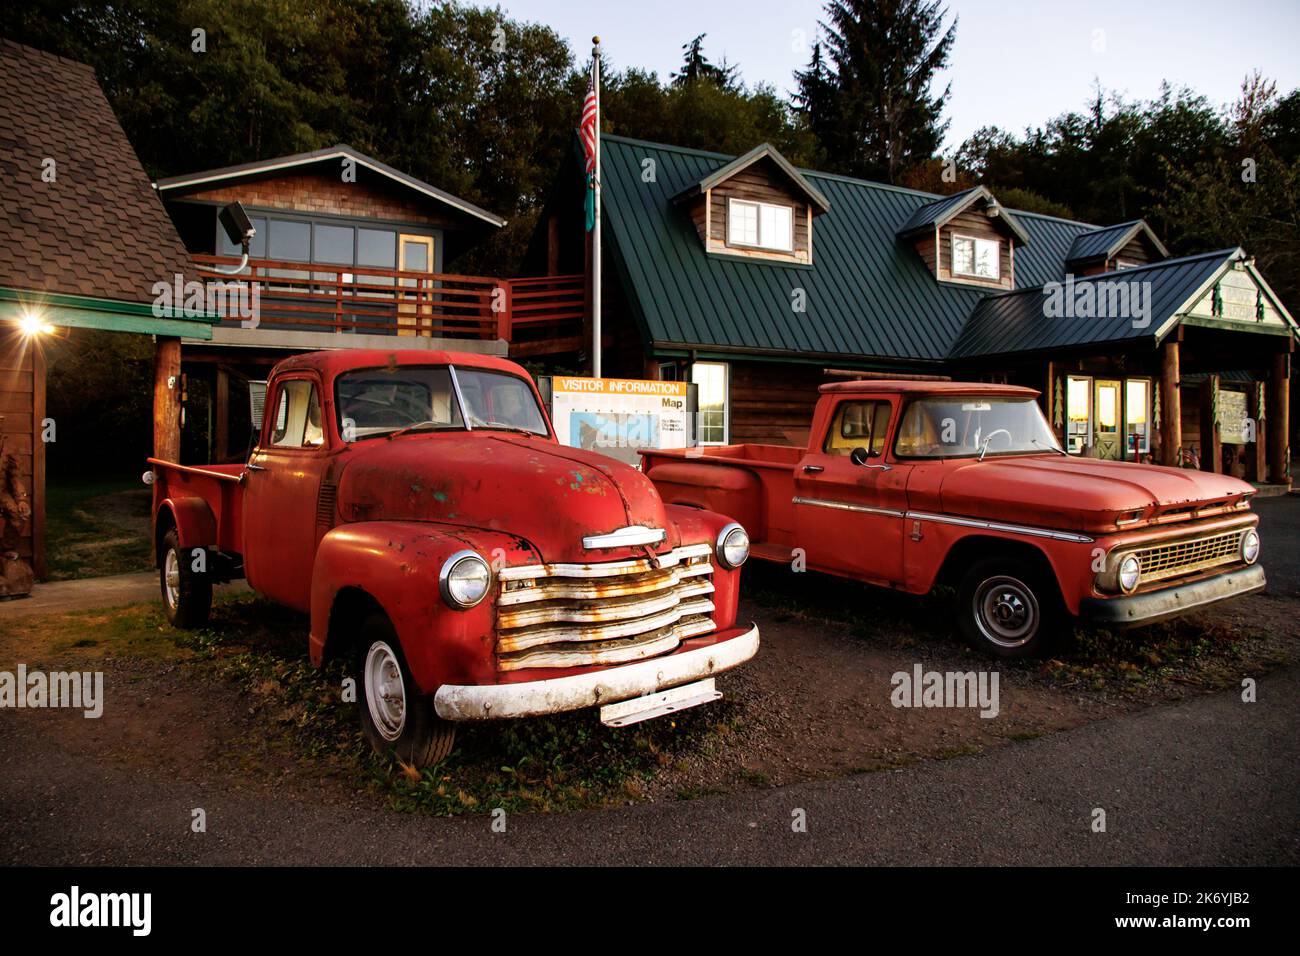 Bella's red rusty truck from Twilight. Legendary Bella's truck in front of Forks visitors center in Washington Stock Photo